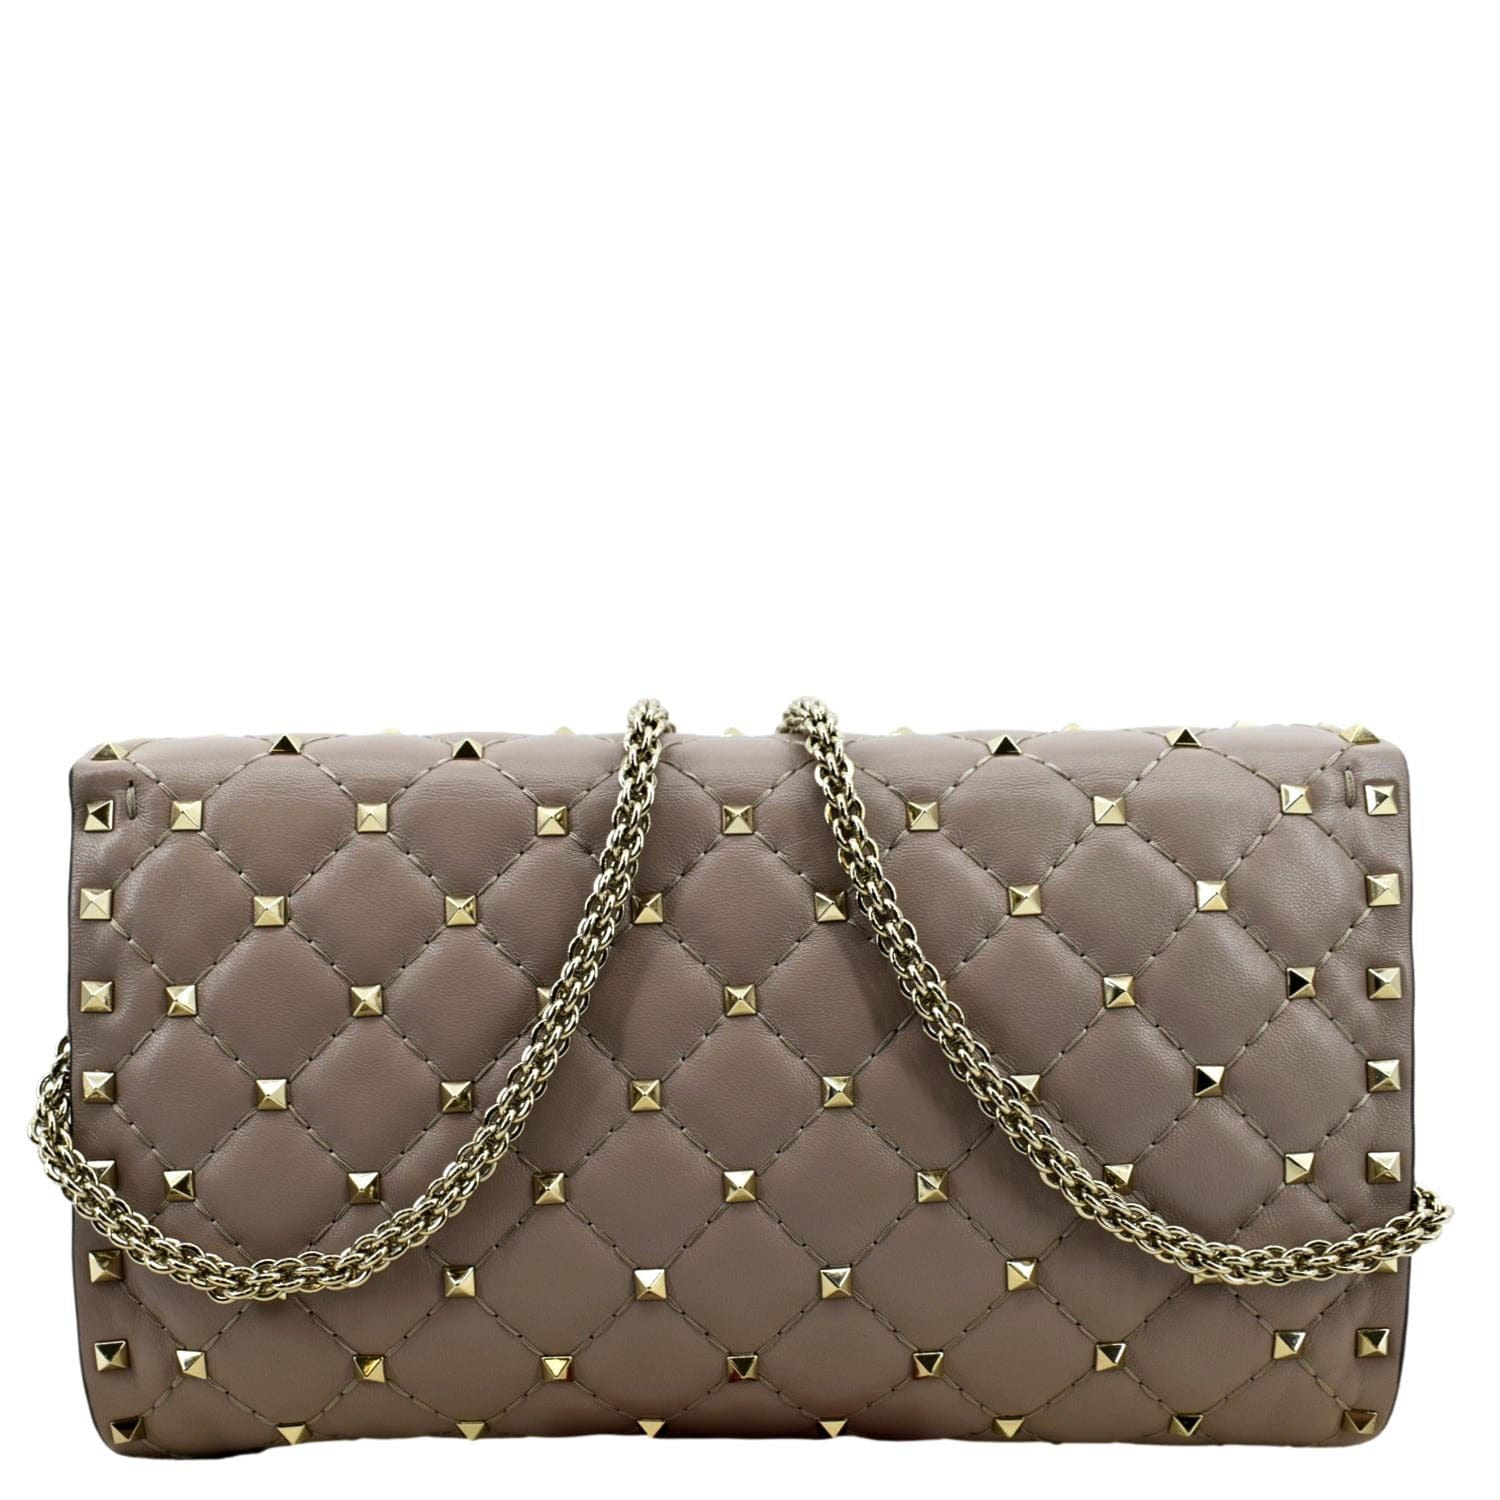 VALENTINO Rockstud Spike Quilted Leather Crossbody Bag Poudre